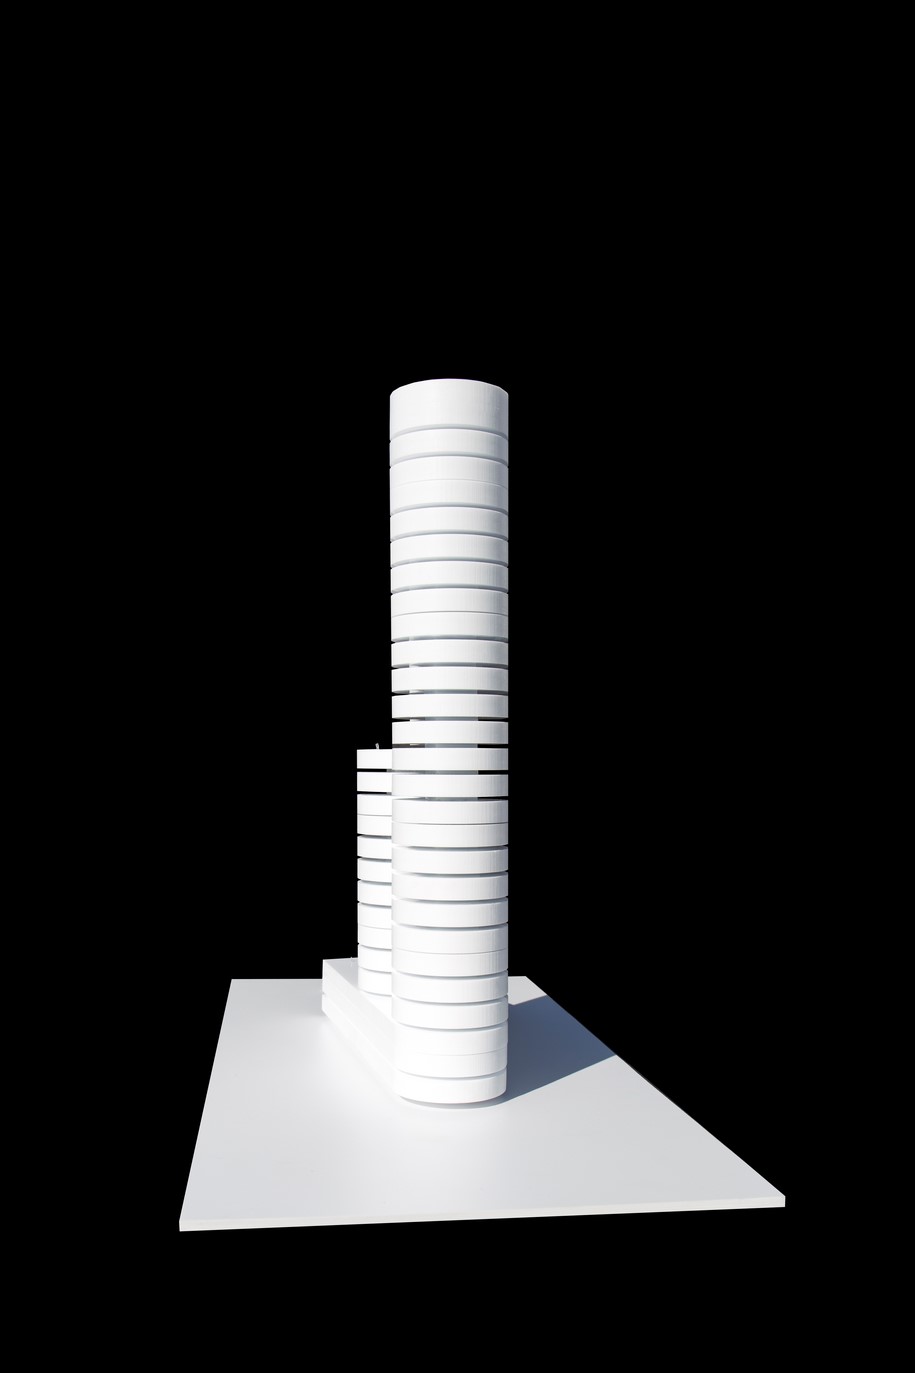 Archisearch FRAN SILVESTRE ARQUITECTOS designed a Tower as a Kouros that guards the access to the city